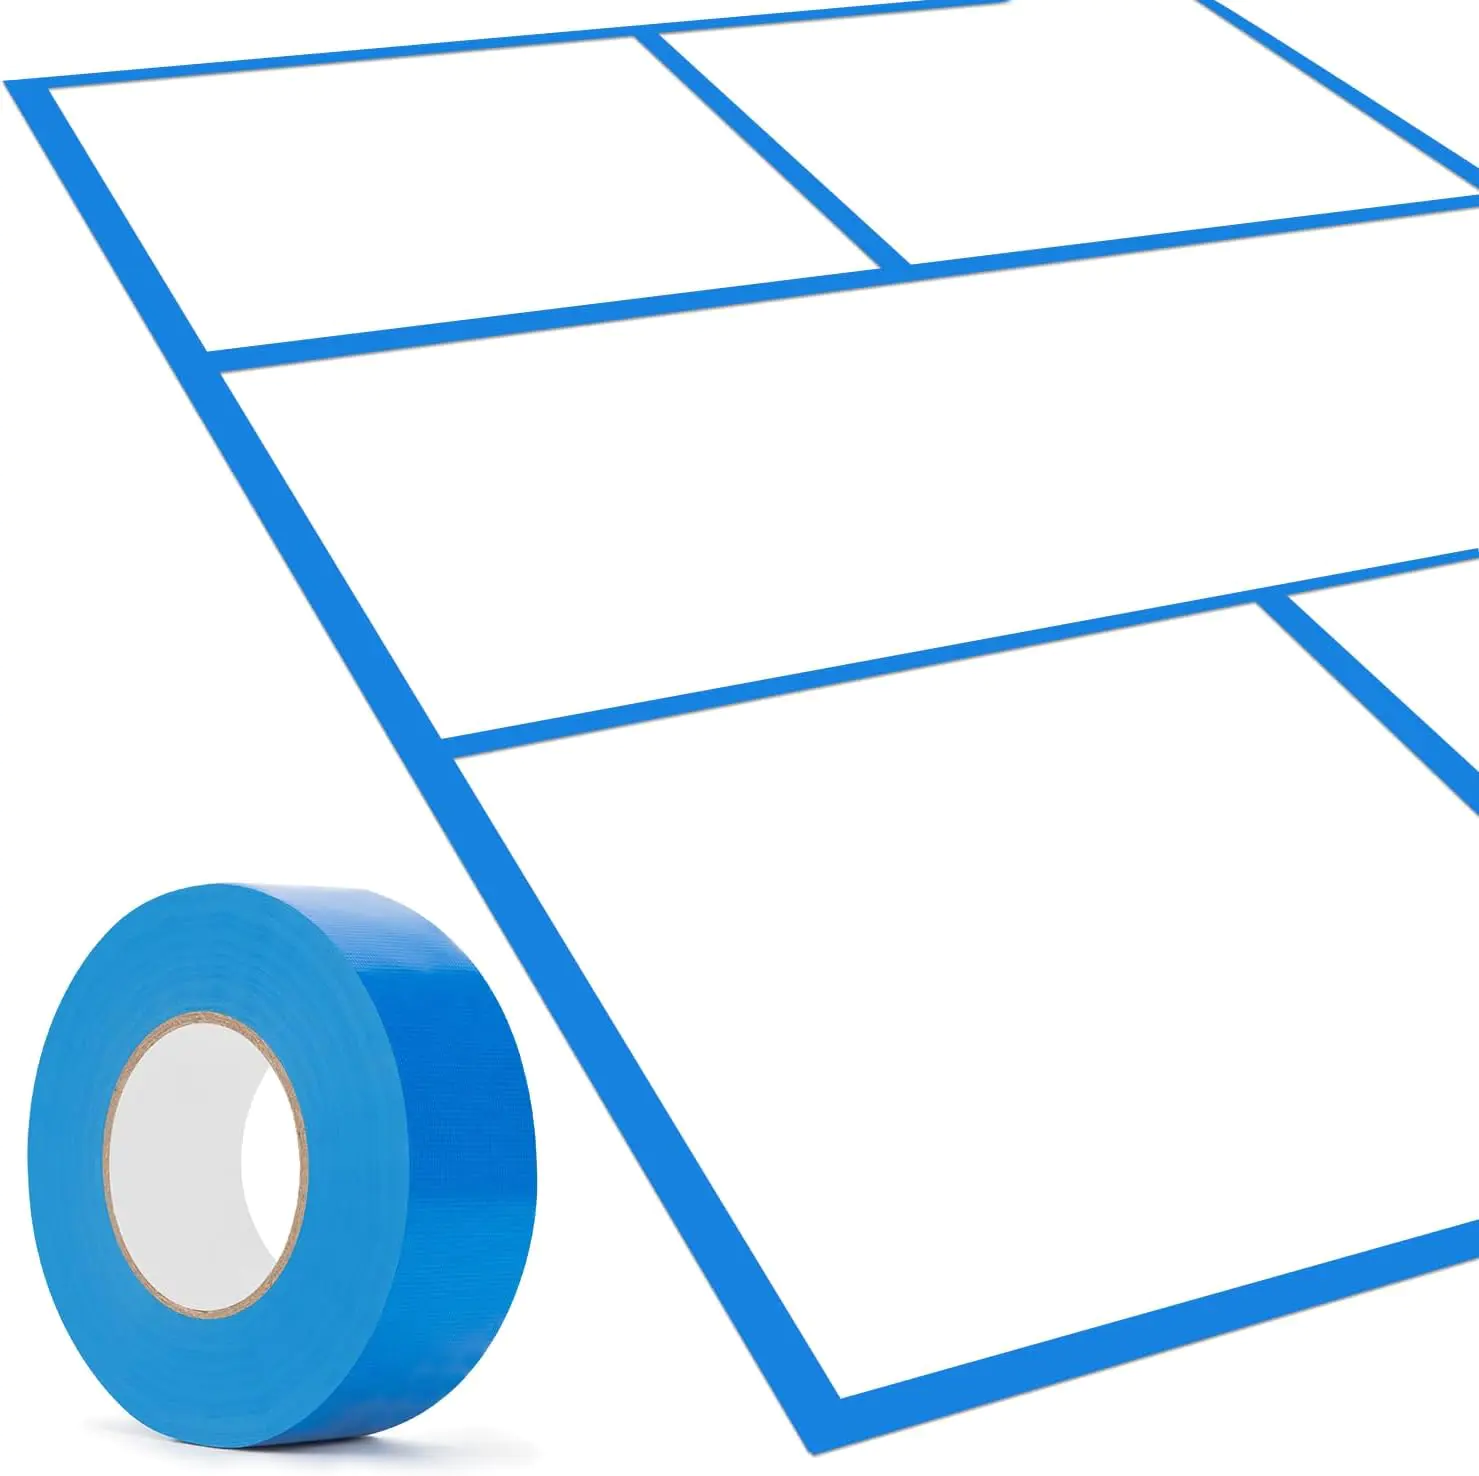 Quick Court Indoor Pickleball Court Marking Tape with Instructions Included for Fast Court Marking